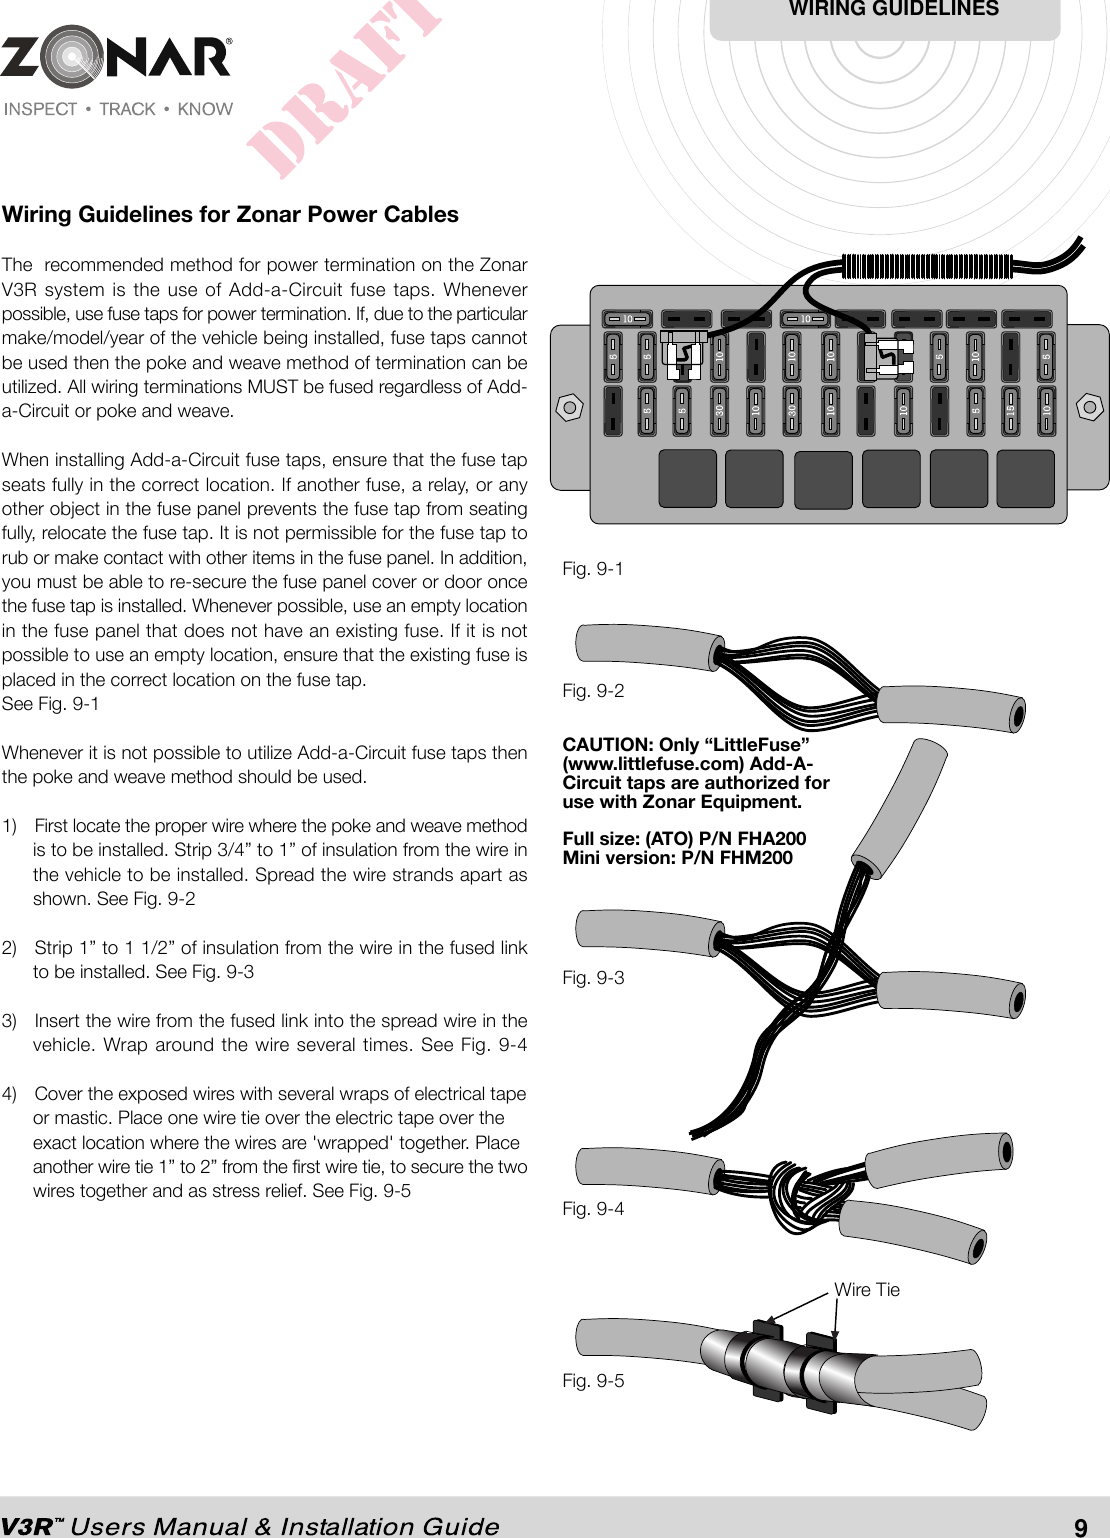 Wiring Guidelines for Zonar Power CablesThe  recommended method for power termination on the ZonarV3R system is the use of Add-a-Circuit fuse taps. Wheneverpossible, use fuse taps for power termination. If, due to the particularmake/model/year of the vehicle being installed, fuse taps cannotbe used then the poke and weave method of termination can beutilized. All wiring terminations MUST be fused regardless of Add-a-Circuit or poke and weave.When installing Add-a-Circuit fuse taps, ensure that the fuse tapseats fully in the correct location. If another fuse, a relay, or anyother object in the fuse panel prevents the fuse tap from seatingfully, relocate the fuse tap. It is not permissible for the fuse tap torub or make contact with other items in the fuse panel. In addition,you must be able to re-secure the fuse panel cover or door oncethe fuse tap is installed. Whenever possible, use an empty locationin the fuse panel that does not have an existing fuse. If it is notpossible to use an empty location, ensure that the existing fuse isplaced in the correct location on the fuse tap.See Fig. 9-1Whenever it is not possible to utilize Add-a-Circuit fuse taps thenthe poke and weave method should be used.1) First locate the proper wire where the poke and weave methodis to be installed. Strip 3/4” to 1” of insulation from the wire inthe vehicle to be installed. Spread the wire strands apart asshown. See Fig. 9-22) Strip 1” to 1 1/2” of insulation from the wire in the fused linkto be installed. See Fig. 9-33) Insert the wire from the fused link into the spread wire in thevehicle. Wrap around the wire several times. See Fig. 9-44) Cover the exposed wires with several wraps of electrical tapeor mastic. Place one wire tie over the electric tape over theexact location where the wires are &apos;wrapped&apos; together. Placeanother wire tie 1” to 2” from the first wire tie, to secure the twowires together and as stress relief. See Fig. 9-5Fig. 9-1Wire TieFig. 9-5Fig. 9-4Fig. 9-3Fig. 9-2WIRING GUIDELINES9CAUTION: Only “LittleFuse”(www.littlefuse.com) Add-A-Circuit taps are authorized foruse with Zonar Equipment.Full size: (ATO) P/N FHA200Mini version: P/N FHM200